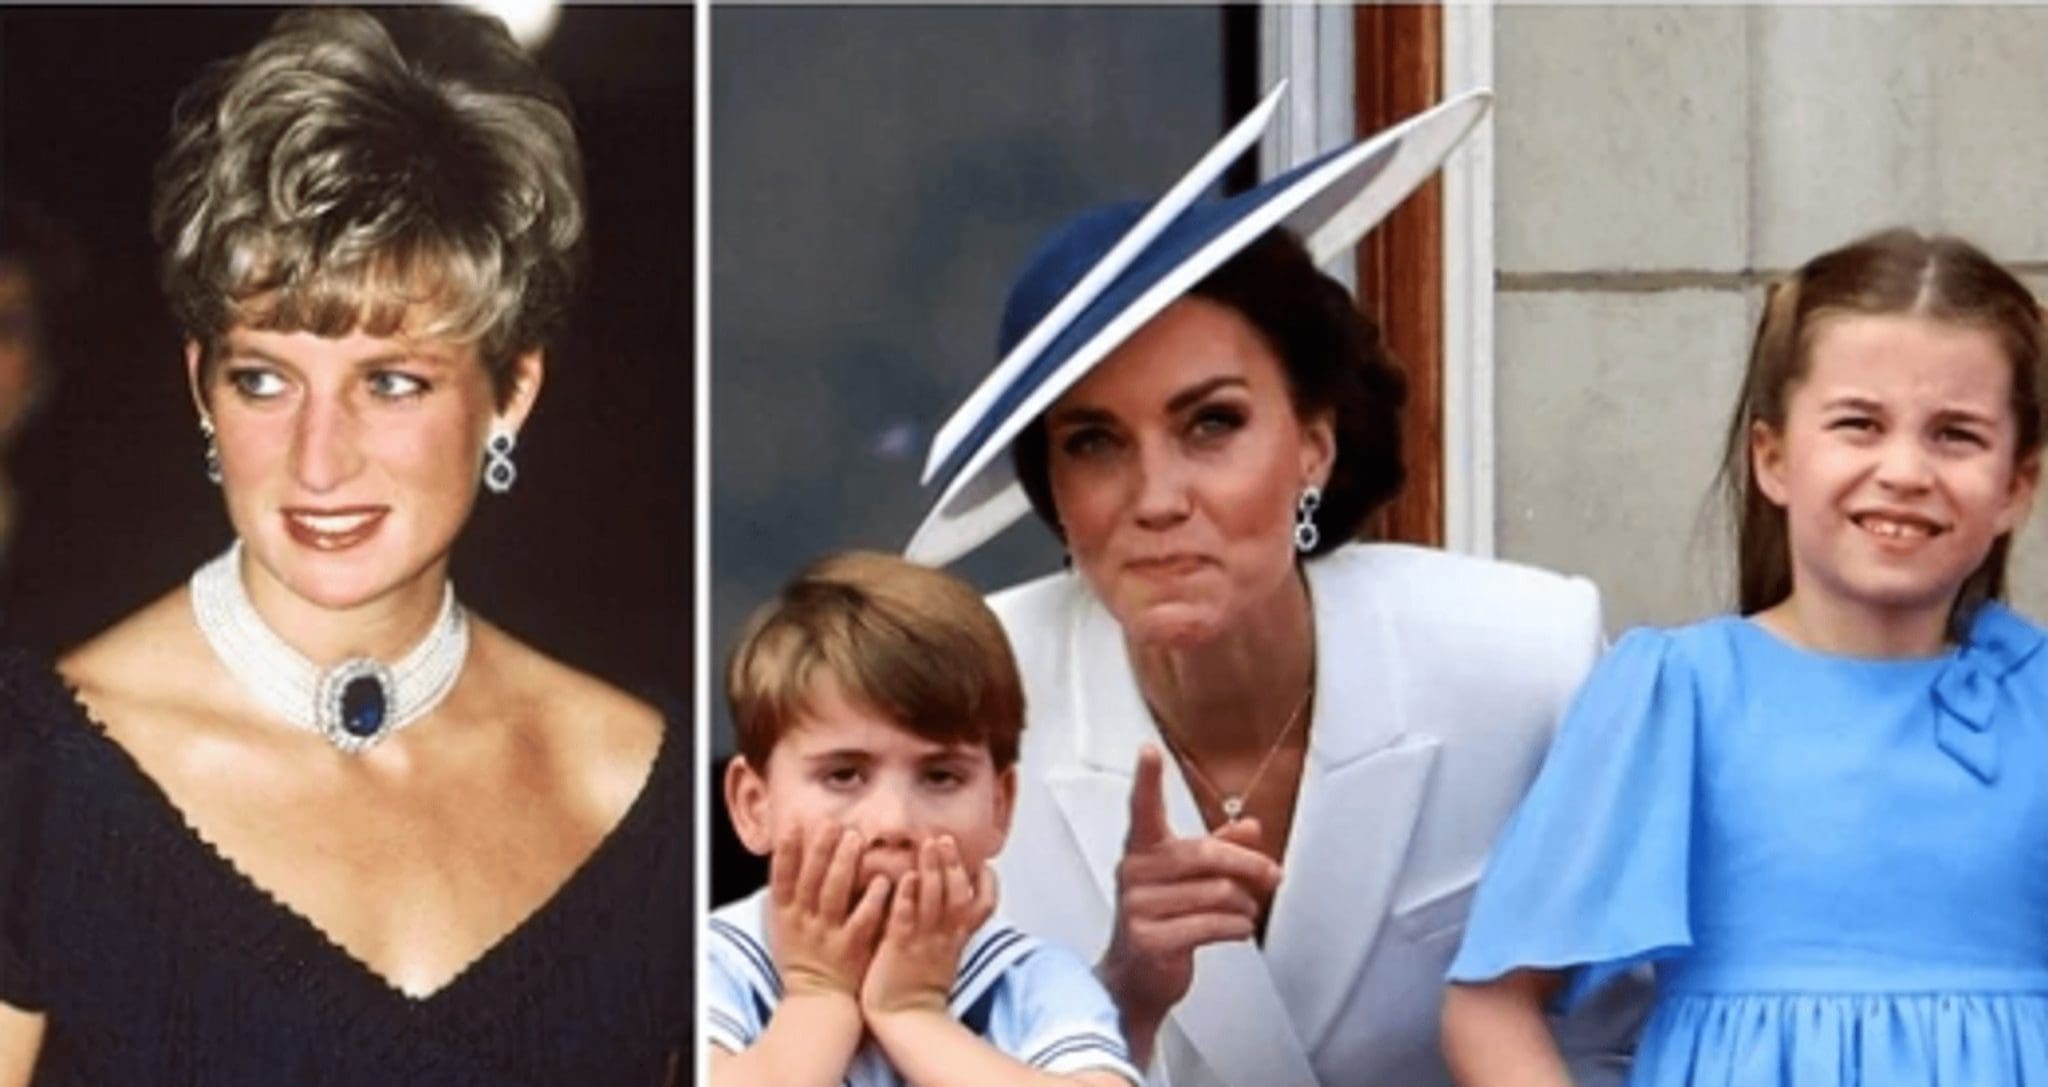 Kate Middleton, at the Queen's Platinum Jubilee, repeated the image of the Princess of Wales